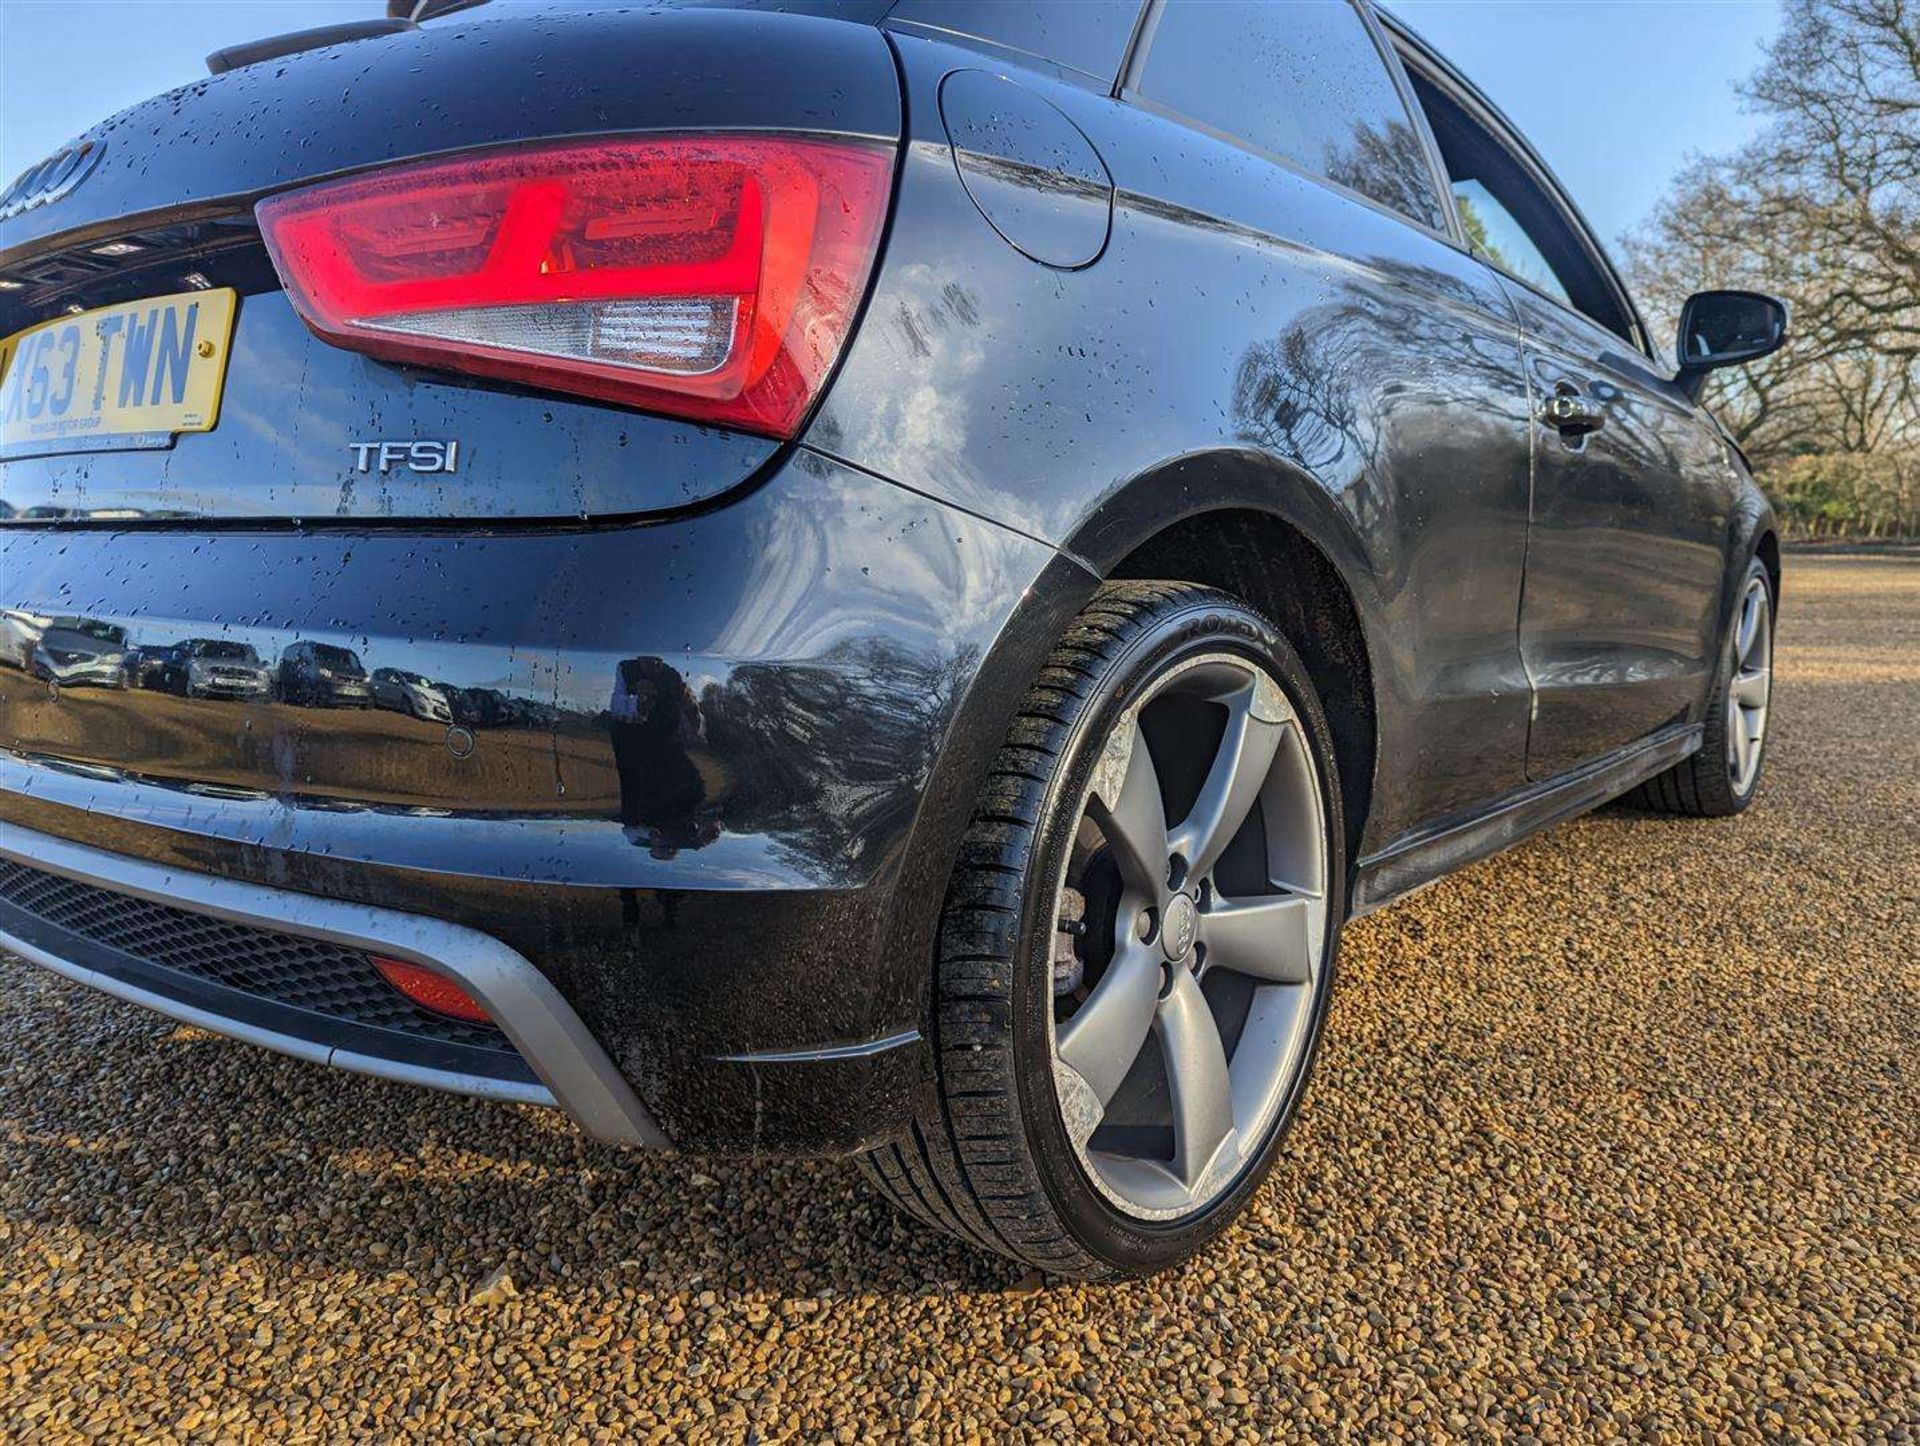 2013 AUDI A1 S LINE BLACKEDITION TF - Image 6 of 18